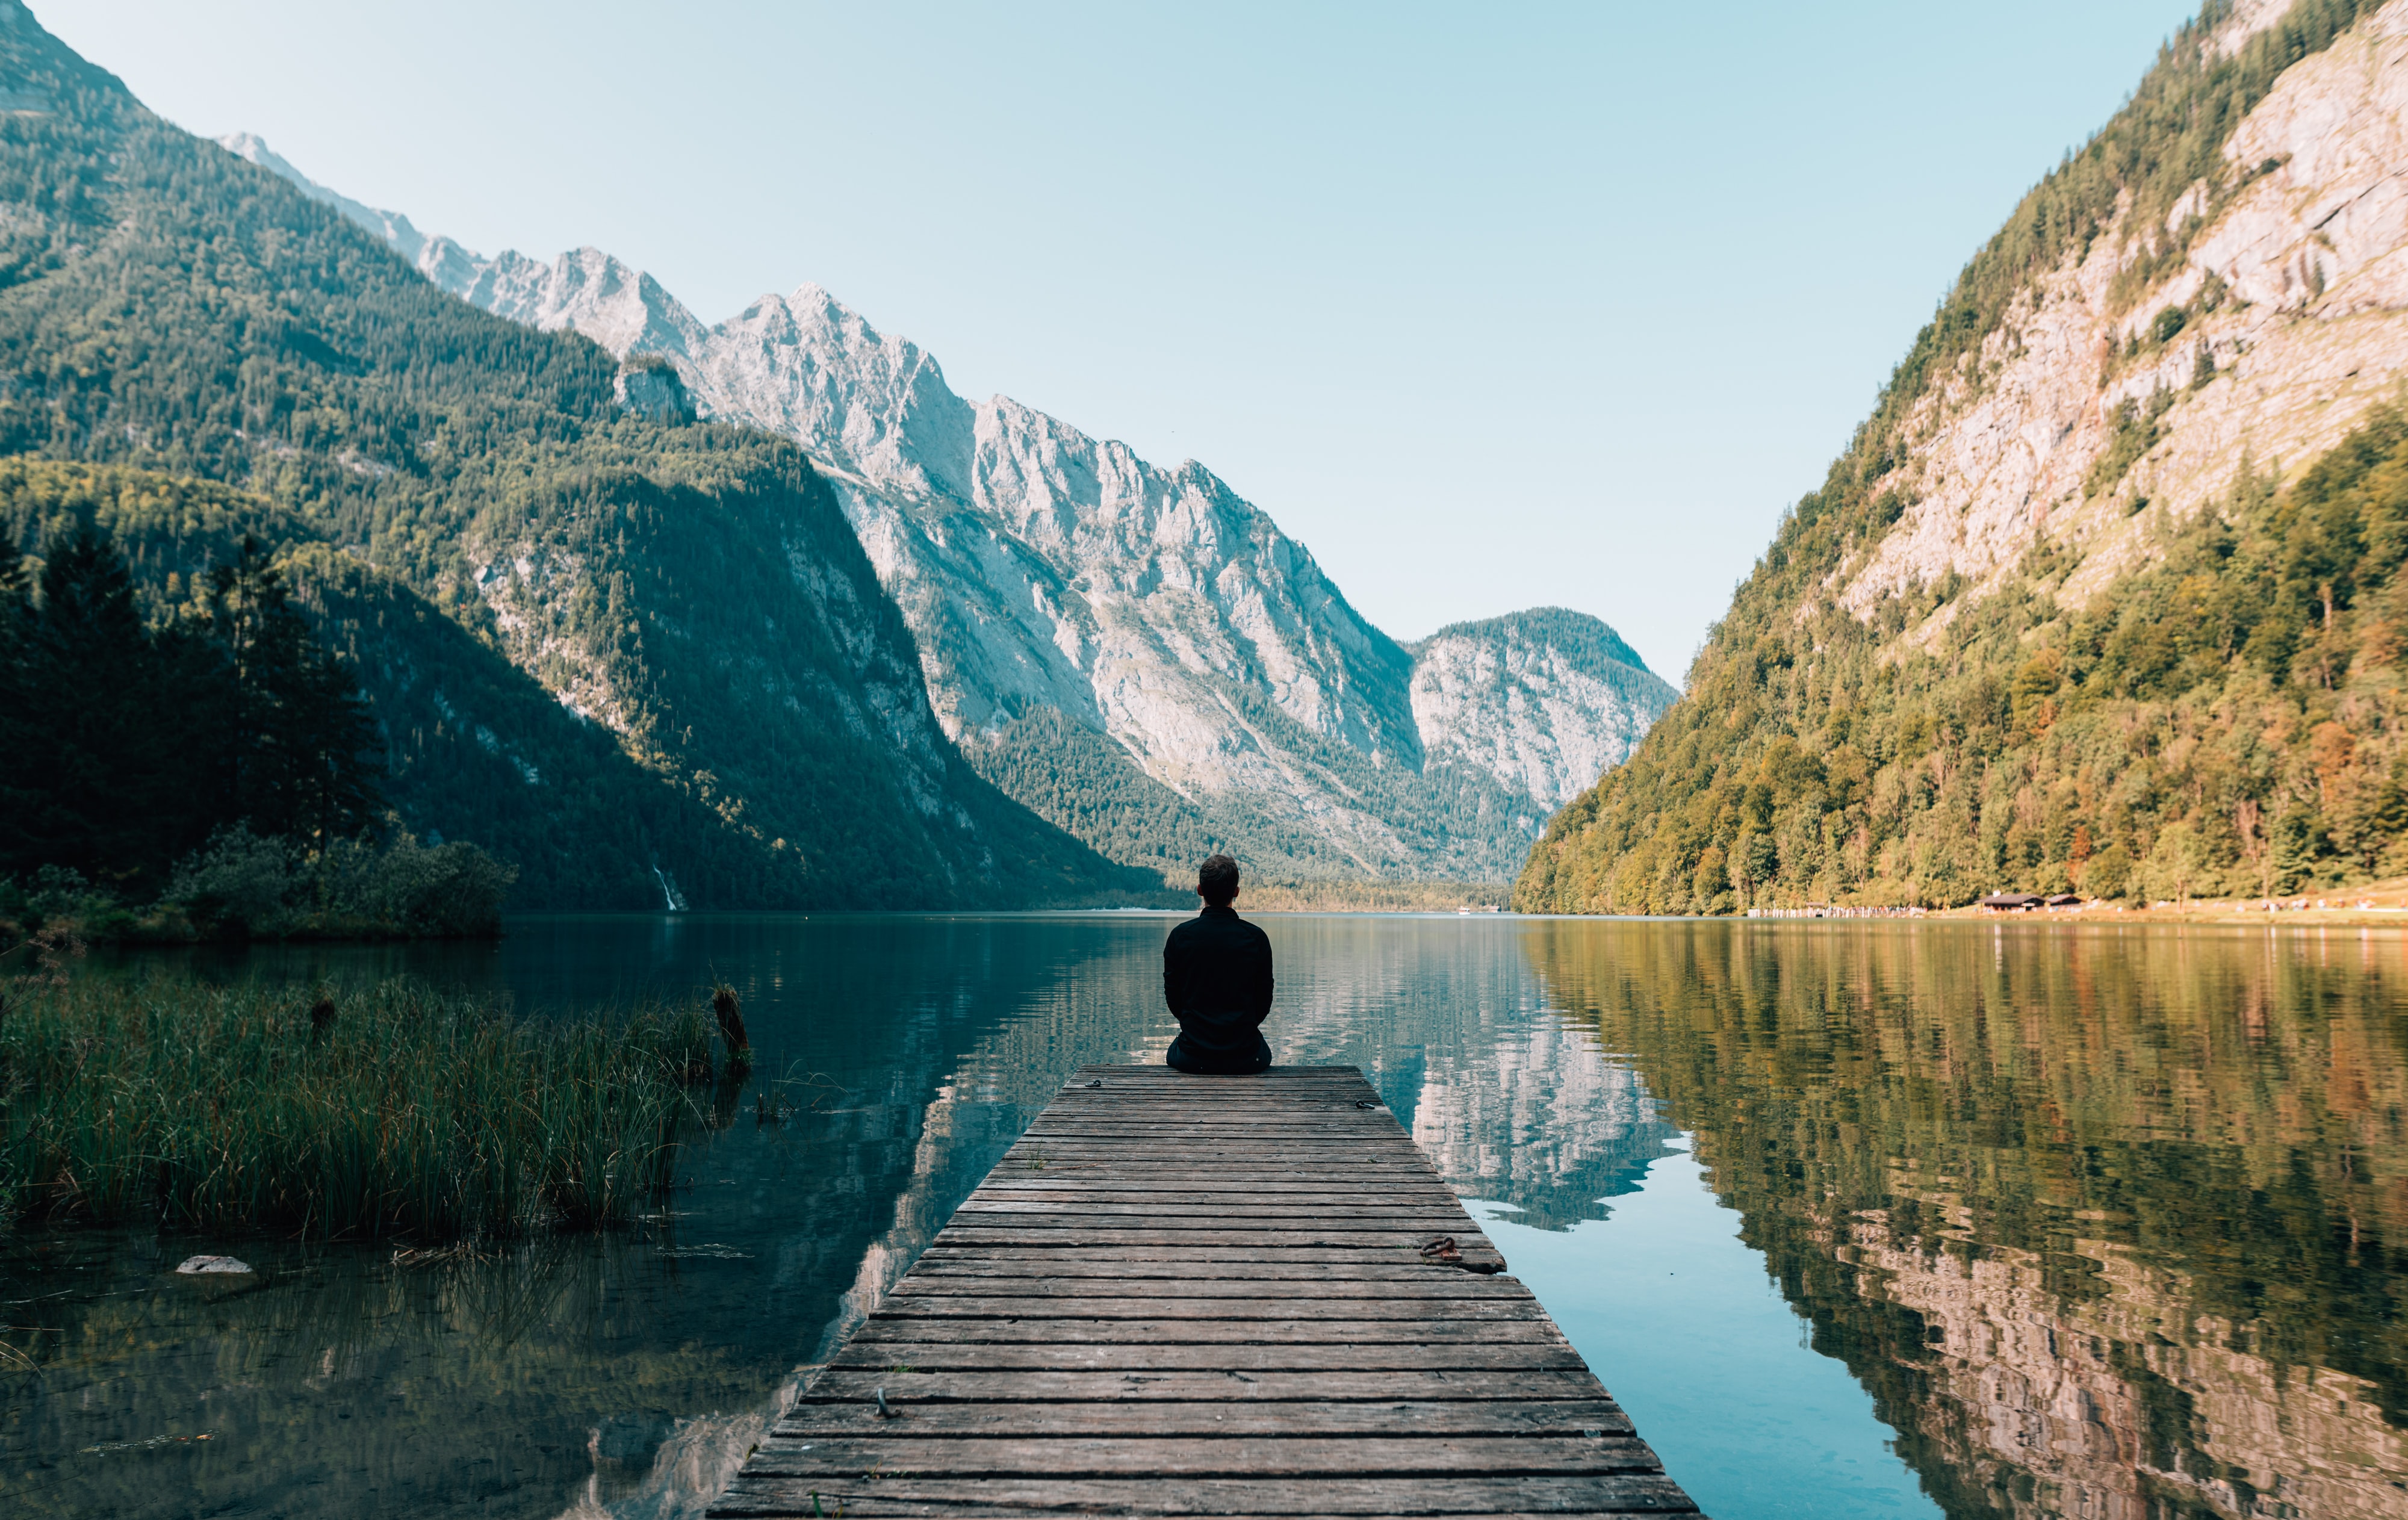 Do i have to stay completely still in meditation?